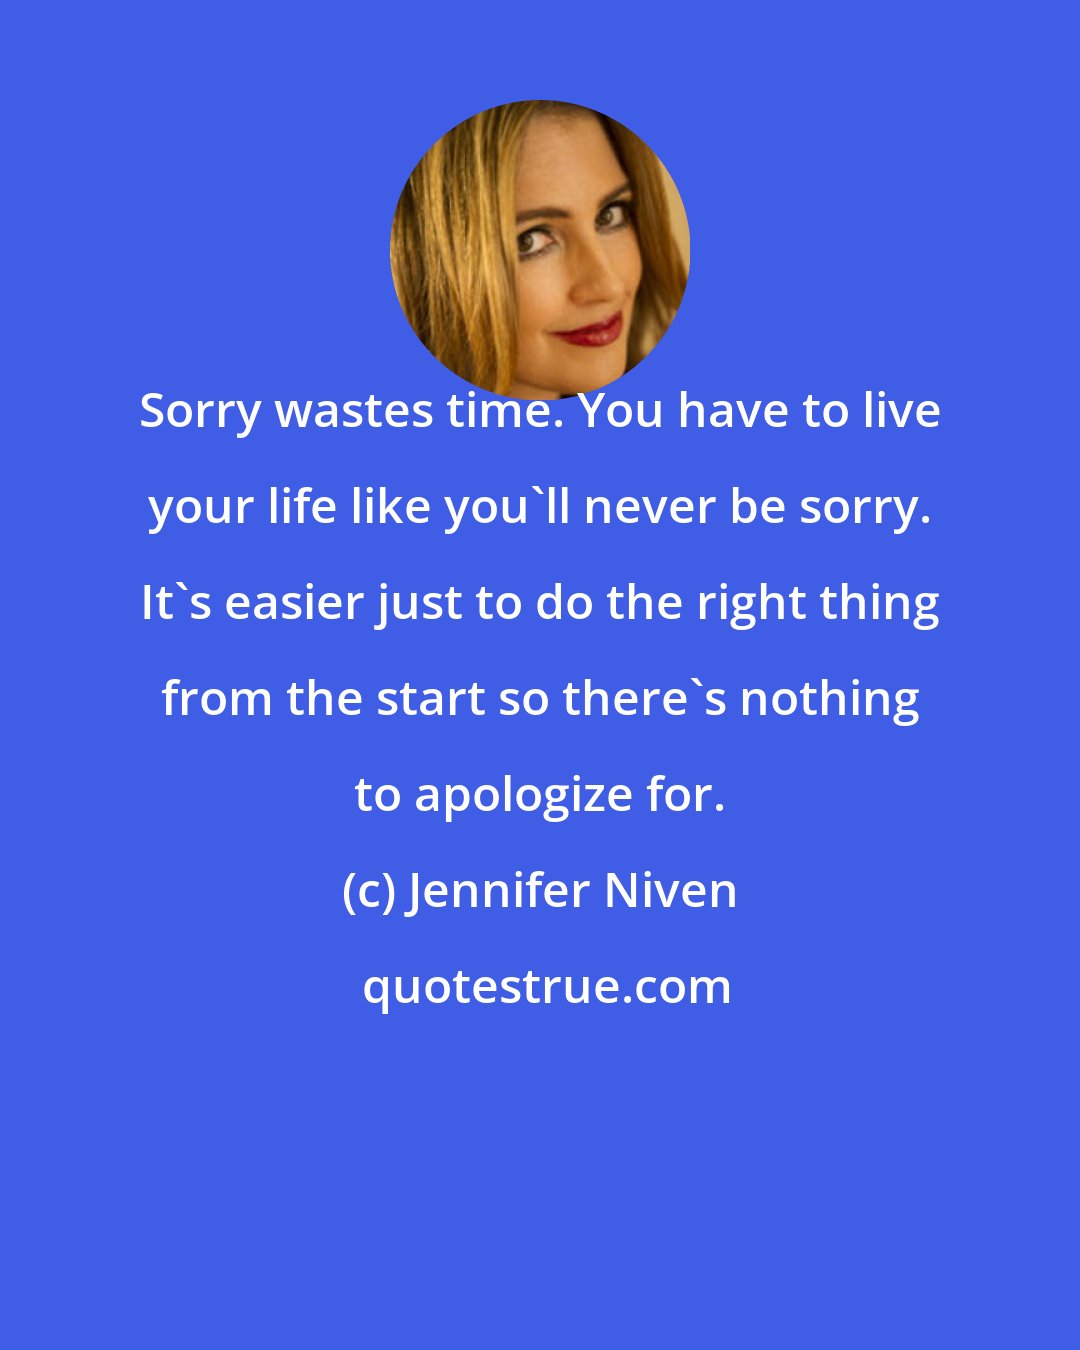 Jennifer Niven: Sorry wastes time. You have to live your life like you'll never be sorry. It's easier just to do the right thing from the start so there's nothing to apologize for.